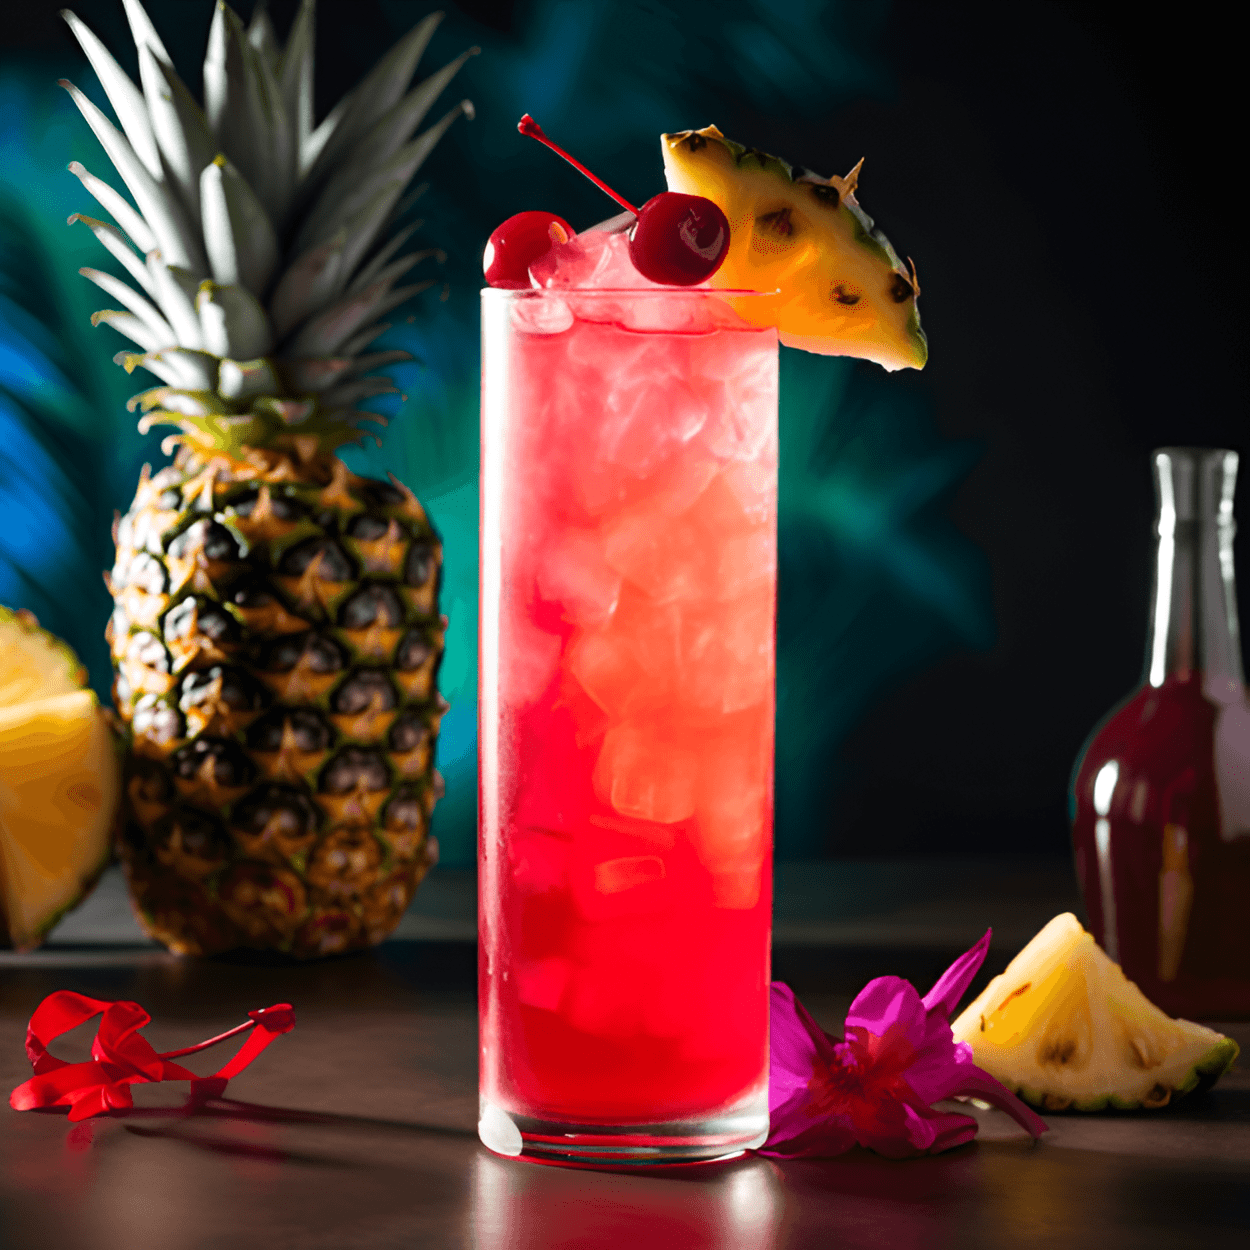 Xtc Cocktail Recipe - The Xtc cocktail is a delightful blend of sweet and sour, with a hint of tropical fruitiness. The vodka provides a strong, smooth base, while the pineapple and cranberry juices add a refreshing tang. The grenadine gives it a sweet finish, making it a well-rounded, enjoyable drink.